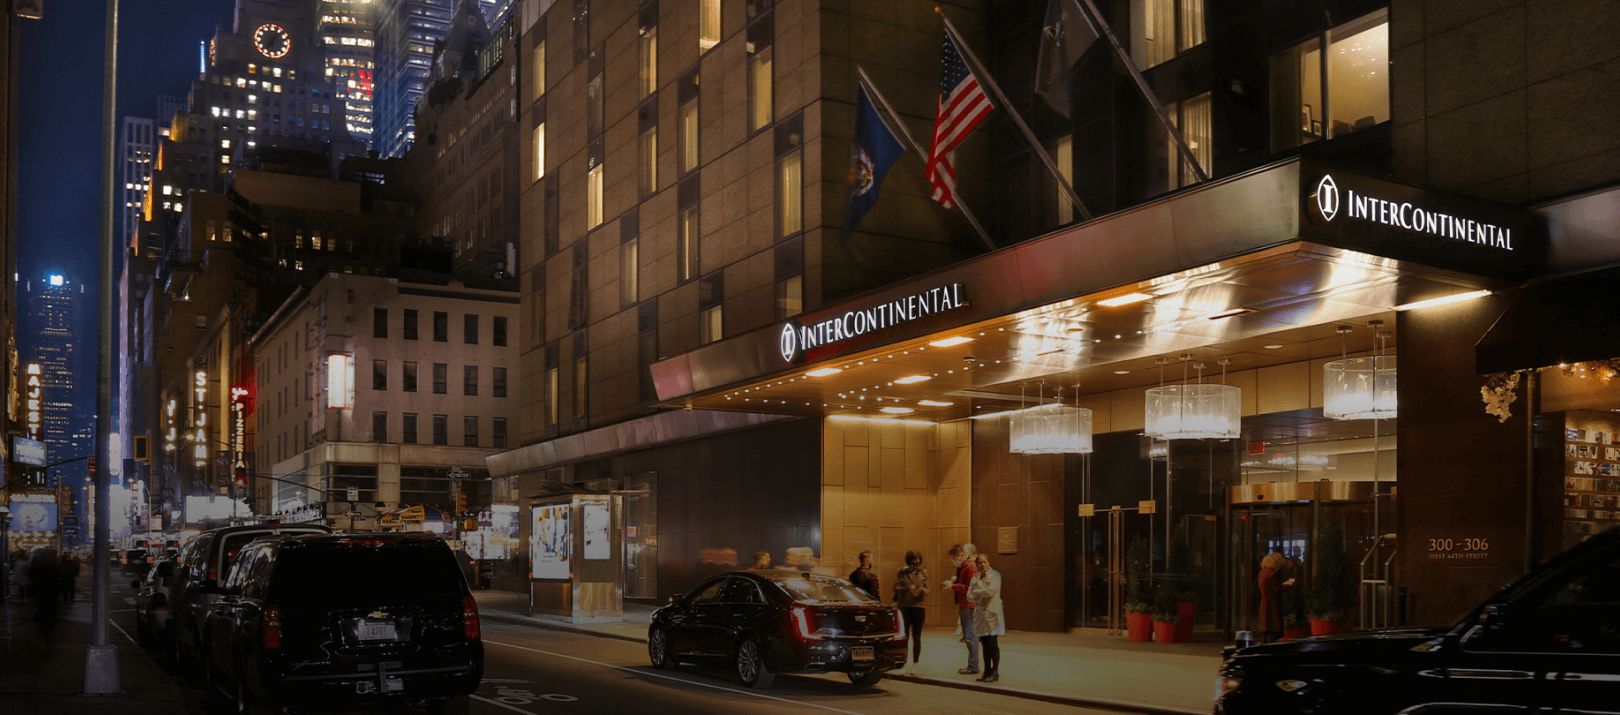 Enjoy our unbeatable location at our hotel near Broadway in NYC